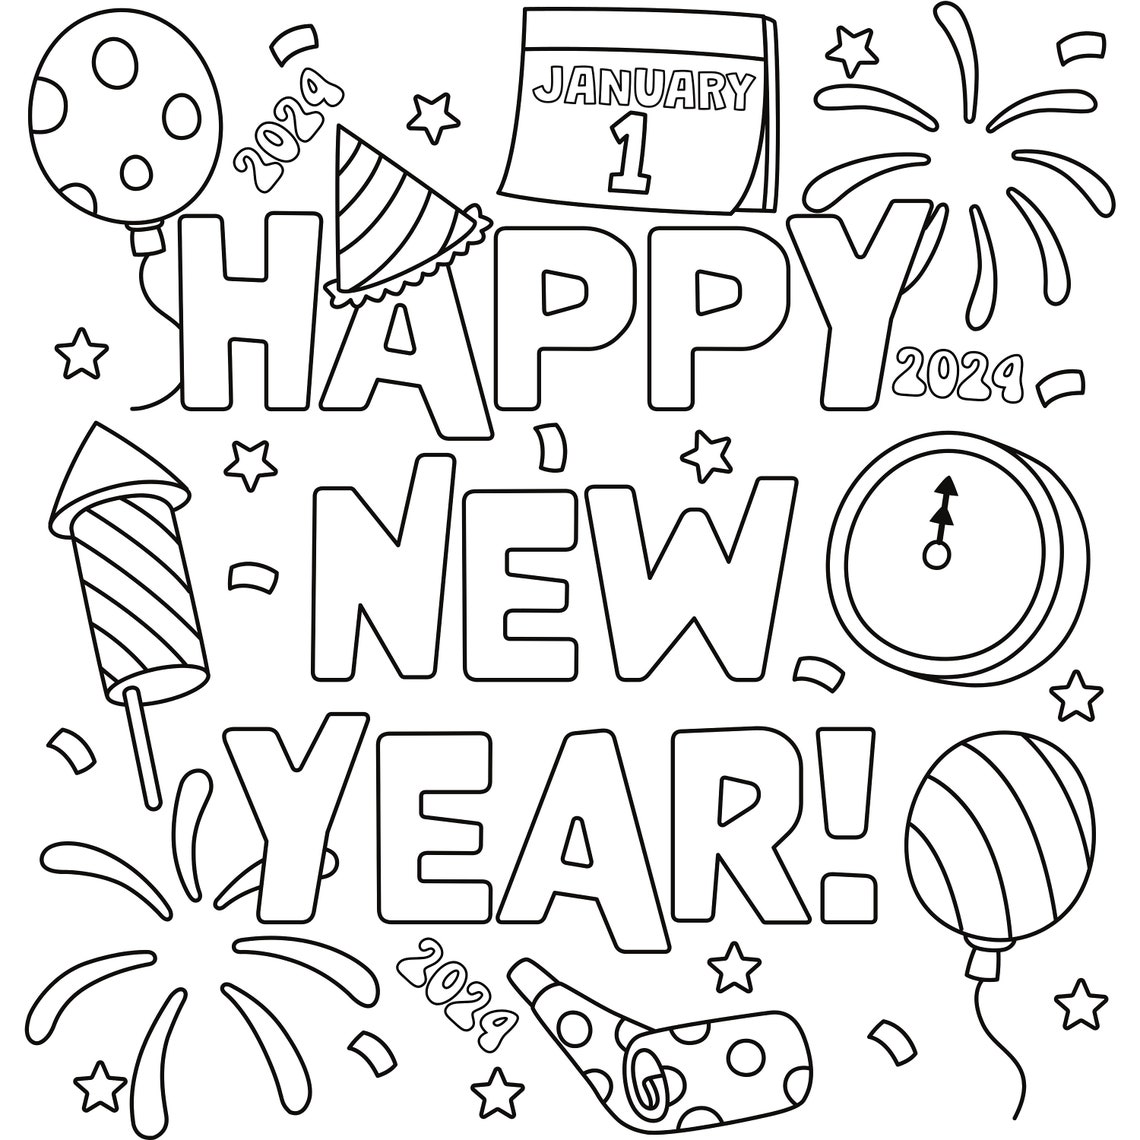 Happy New Year Coloring Pages, New Year Coloring Pages, Coloring Pages ...